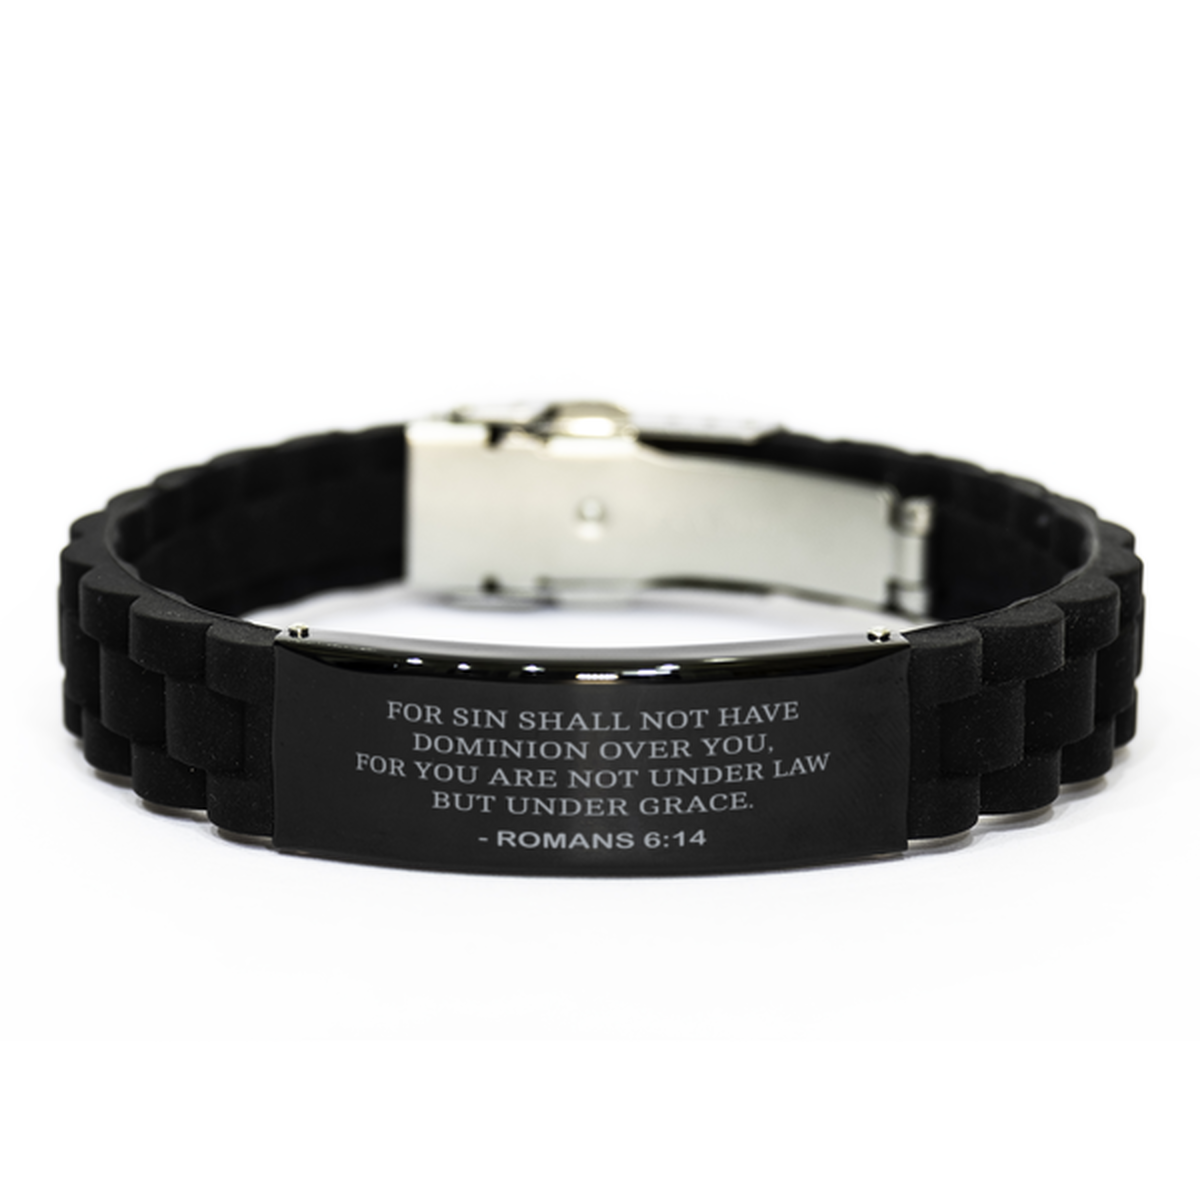 Bible Verse Black Bracelet,, Romans 6:14 For Sin Shall Not Have Dominion Over You, For You, Inspirational Christian Gifts For Men Women